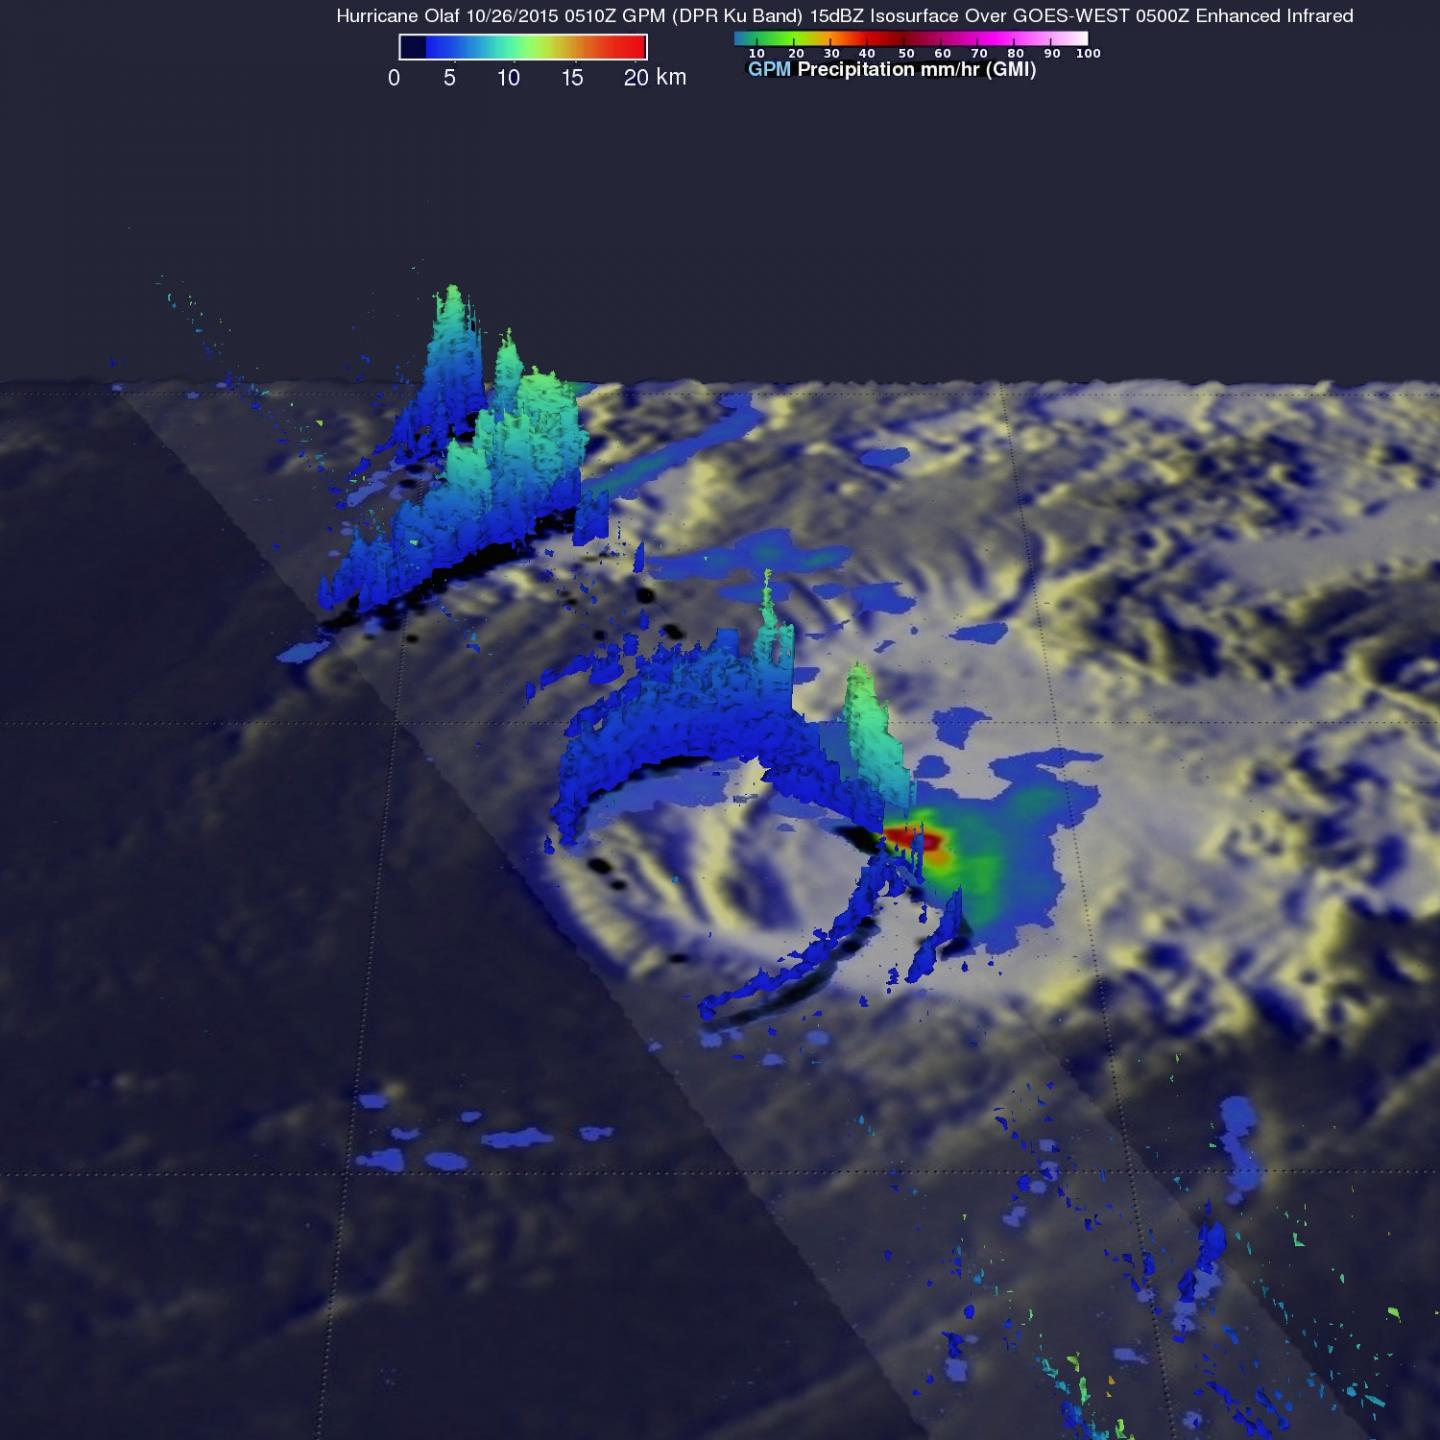 GPM Image of Olaf